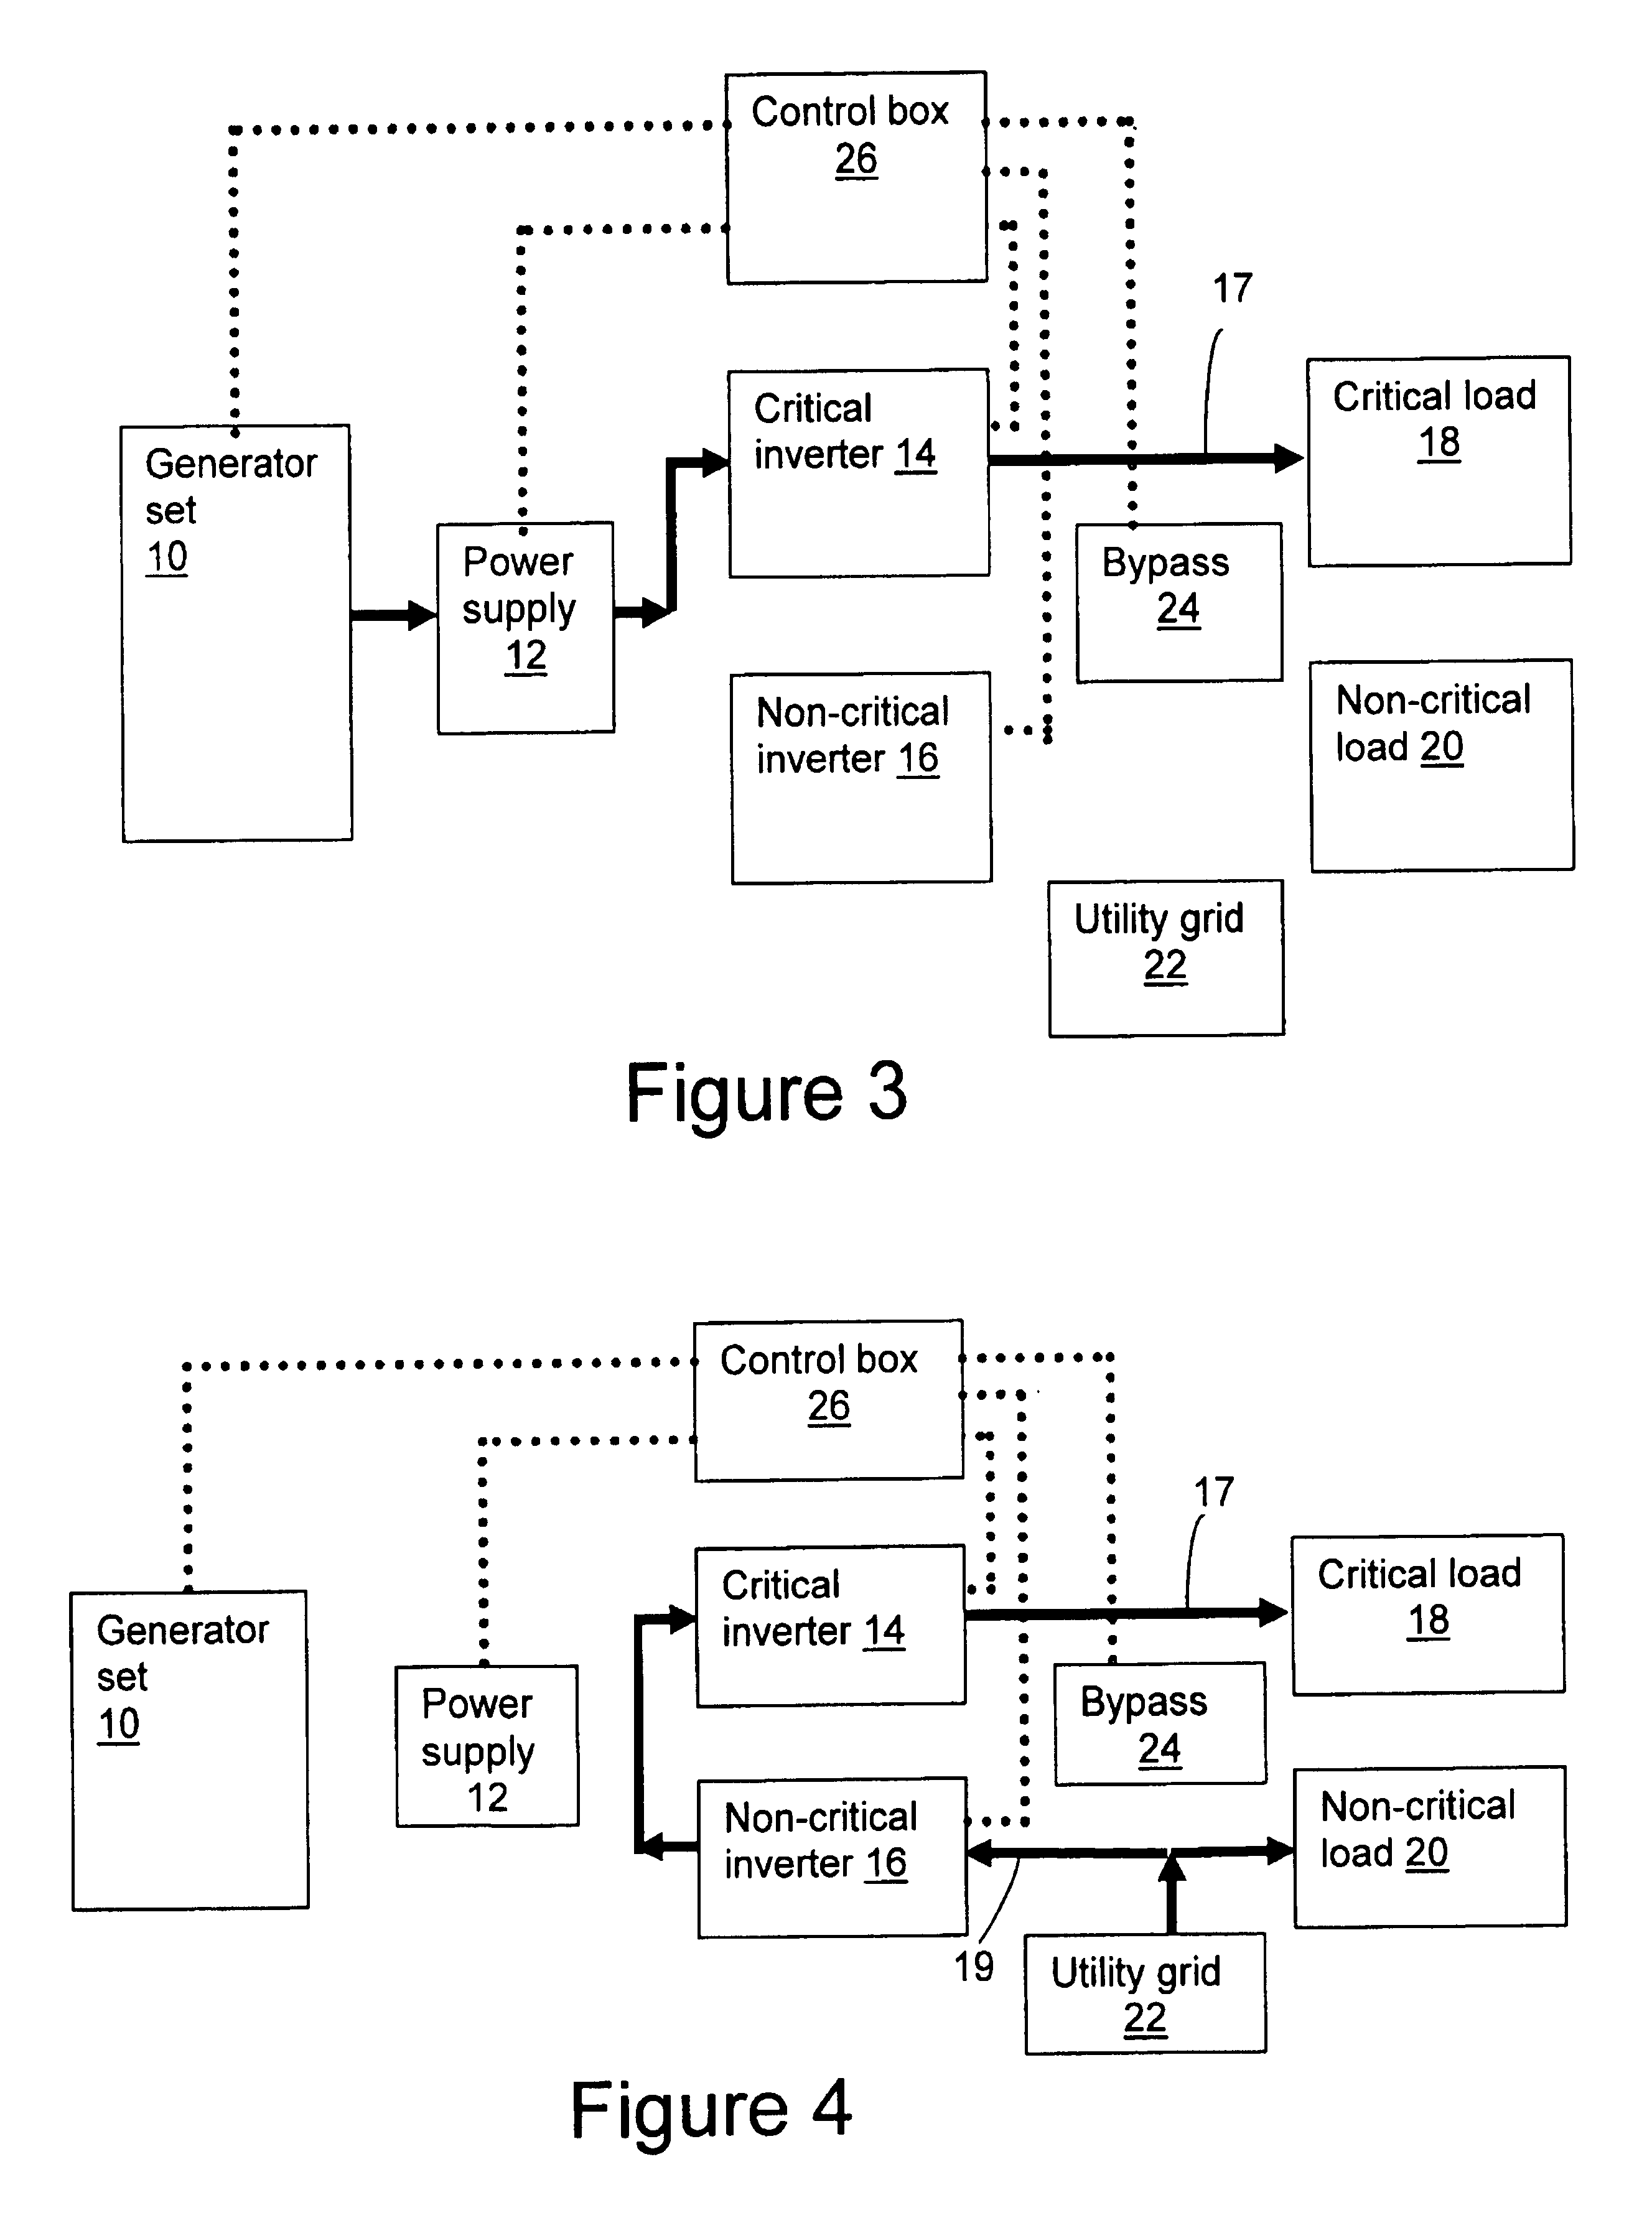 Multiple inverter power system with regard to generator failure